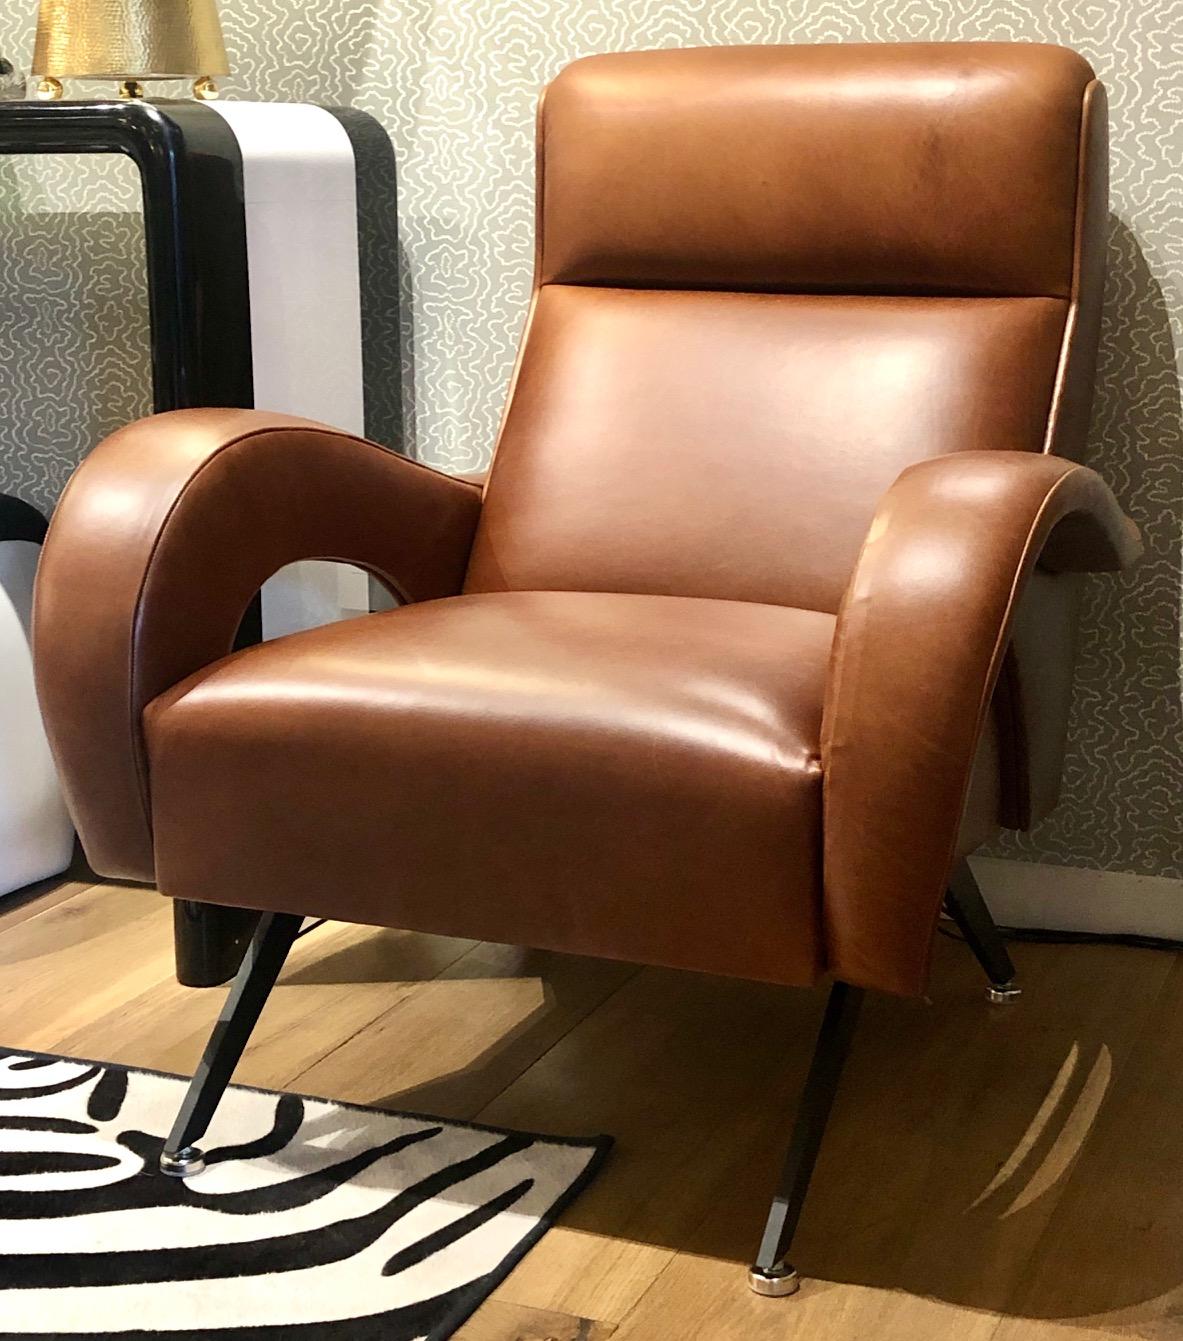 New edition to MLB Furniture collection. Midcentury style armchair in a sexy sleek design upholstered in a conjac color leather that get even better looking with age. Black steel legs with a chrome foot. 2 in stock at this time.
Can also be made in